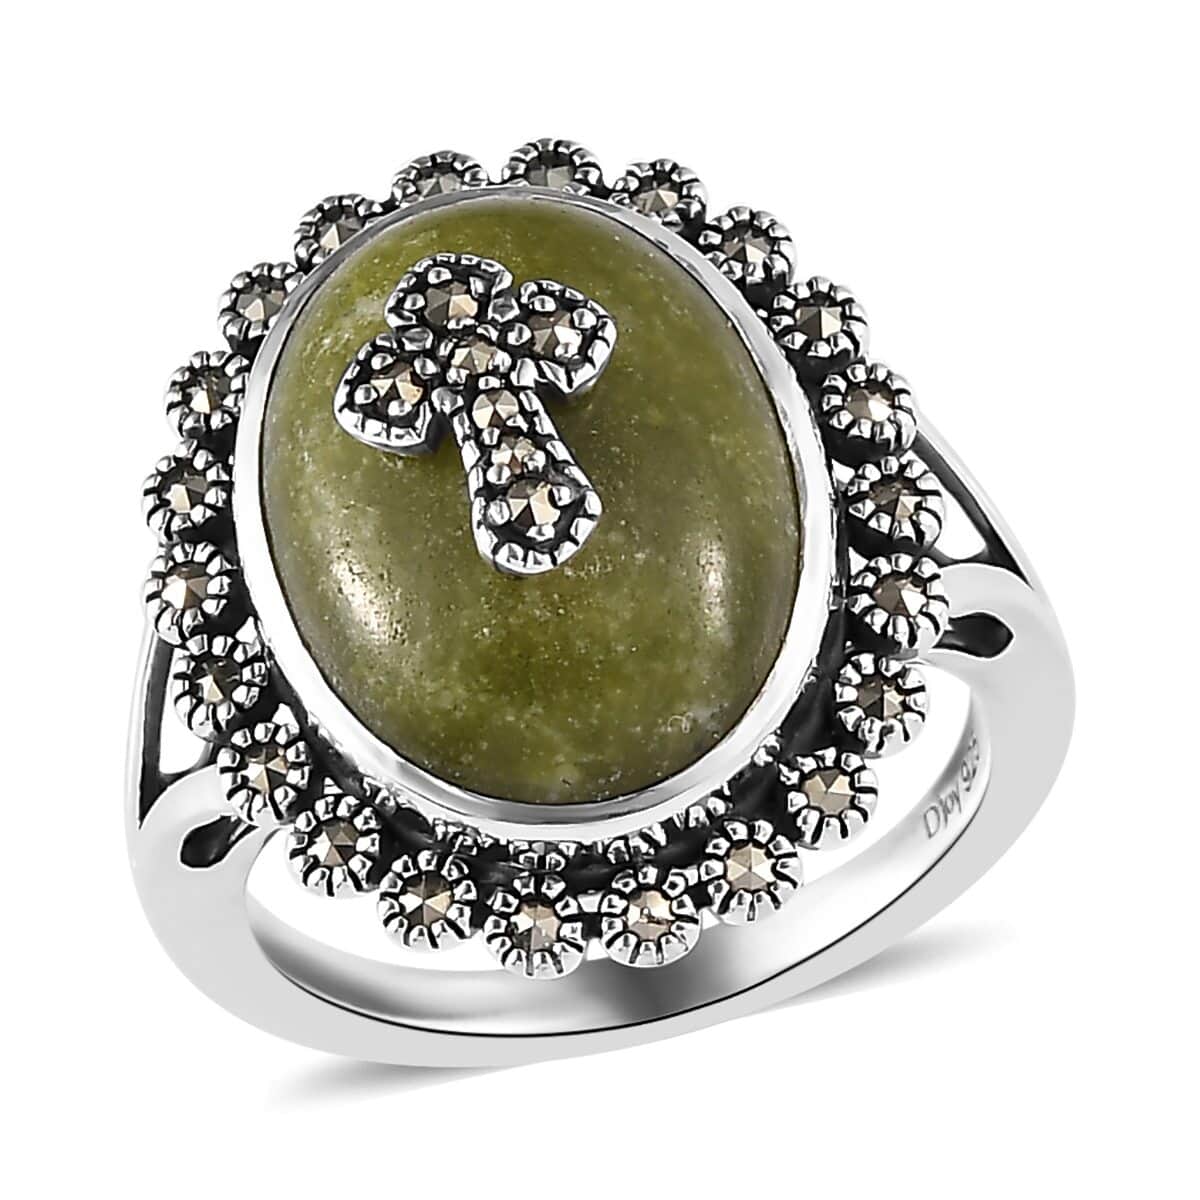 Connemara Marble and Swiss Marcasite Ring in Sterling Silver 7.65 ctw (Delivery in 3-5 Business Days) image number 0